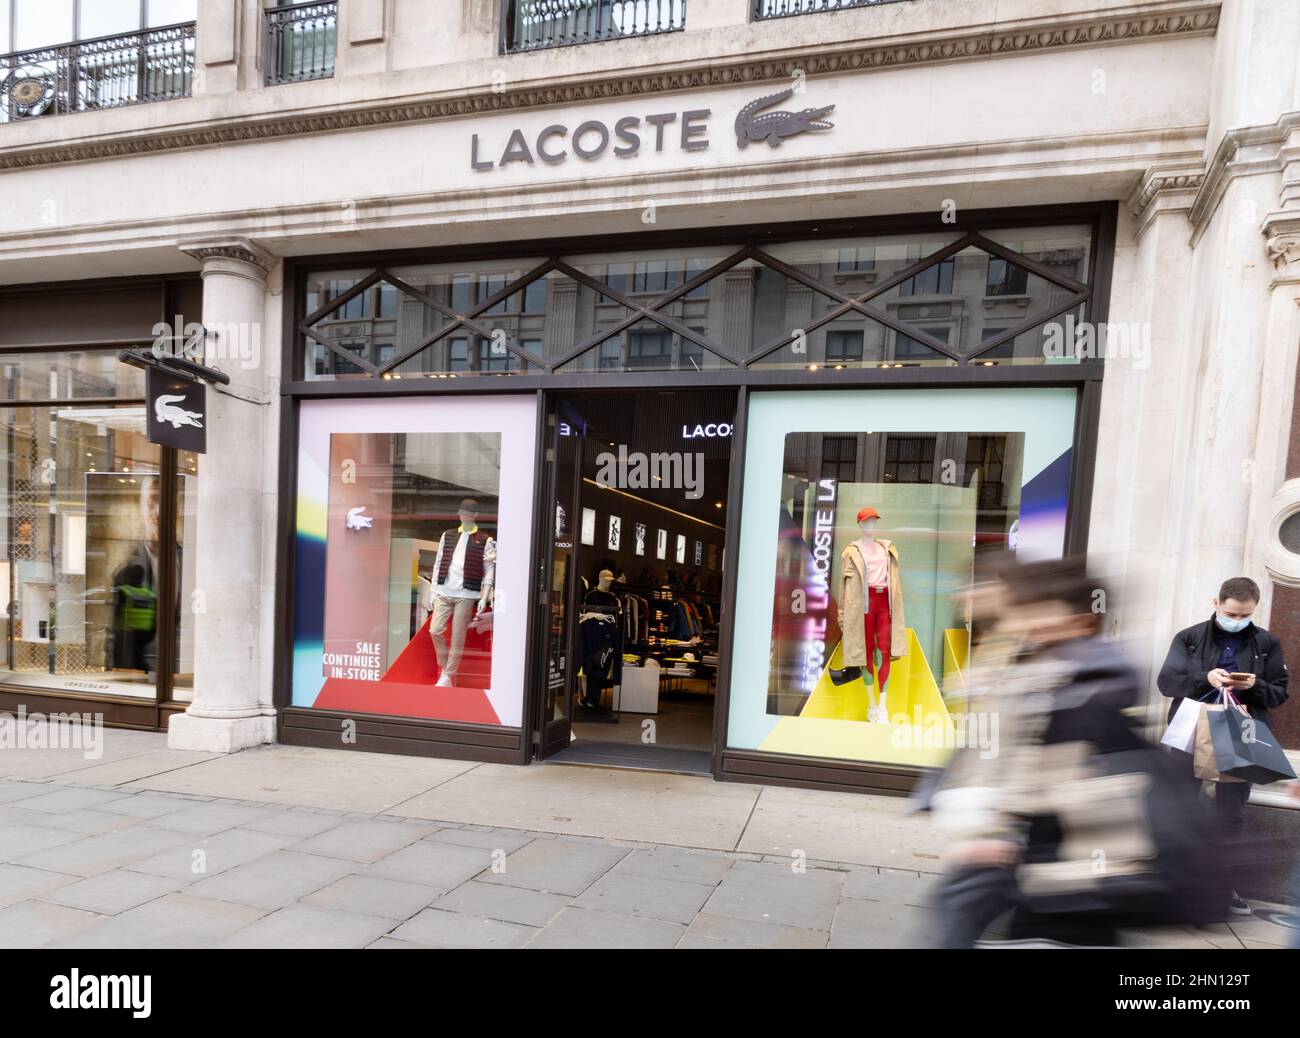 Lacoste USA To Restructure Retail Business, Leases The Real Deal | art ...